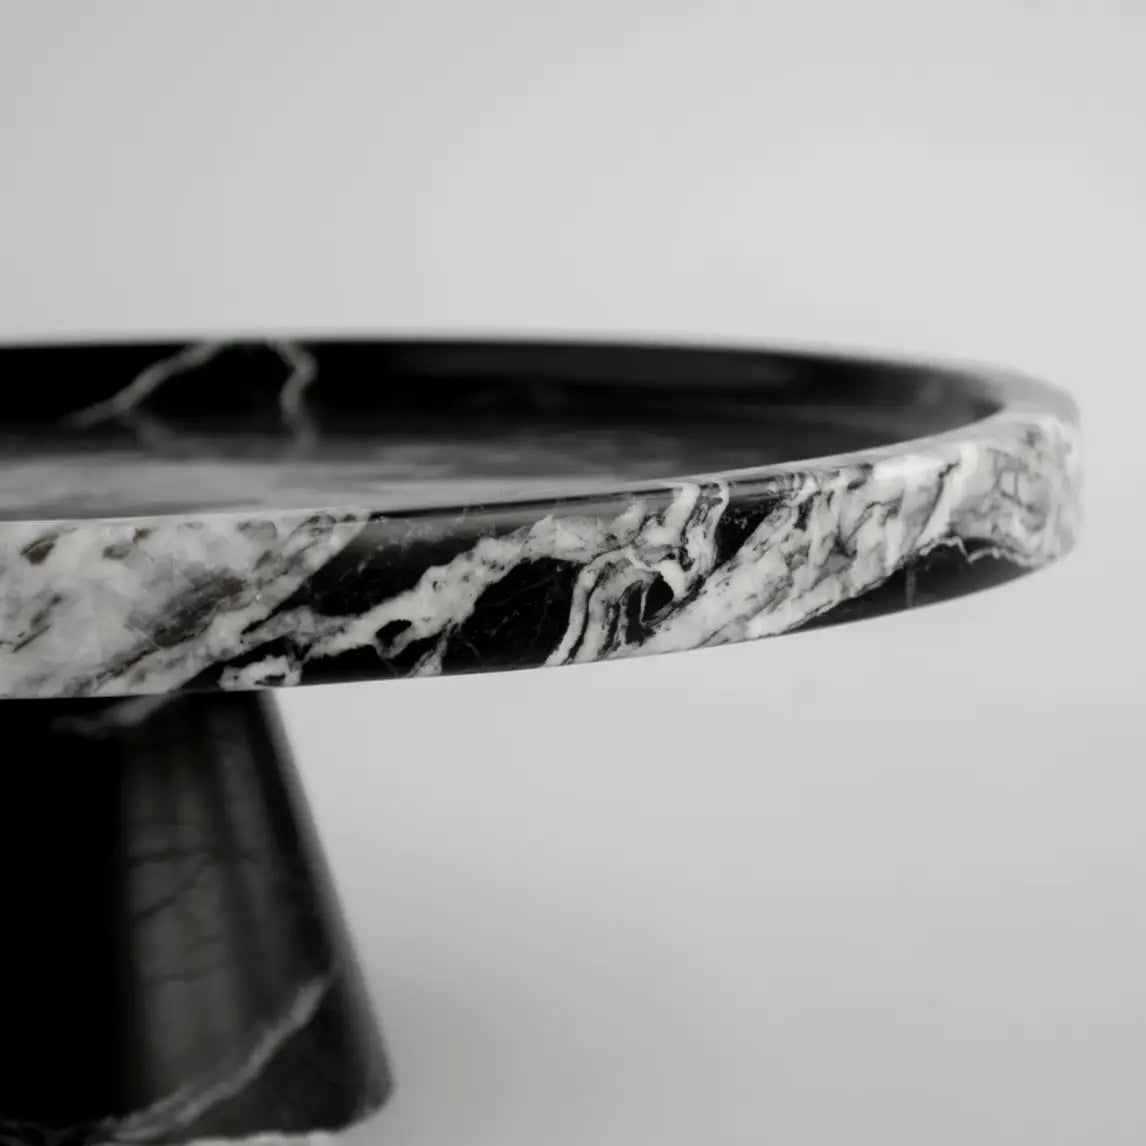 The Marble Platter